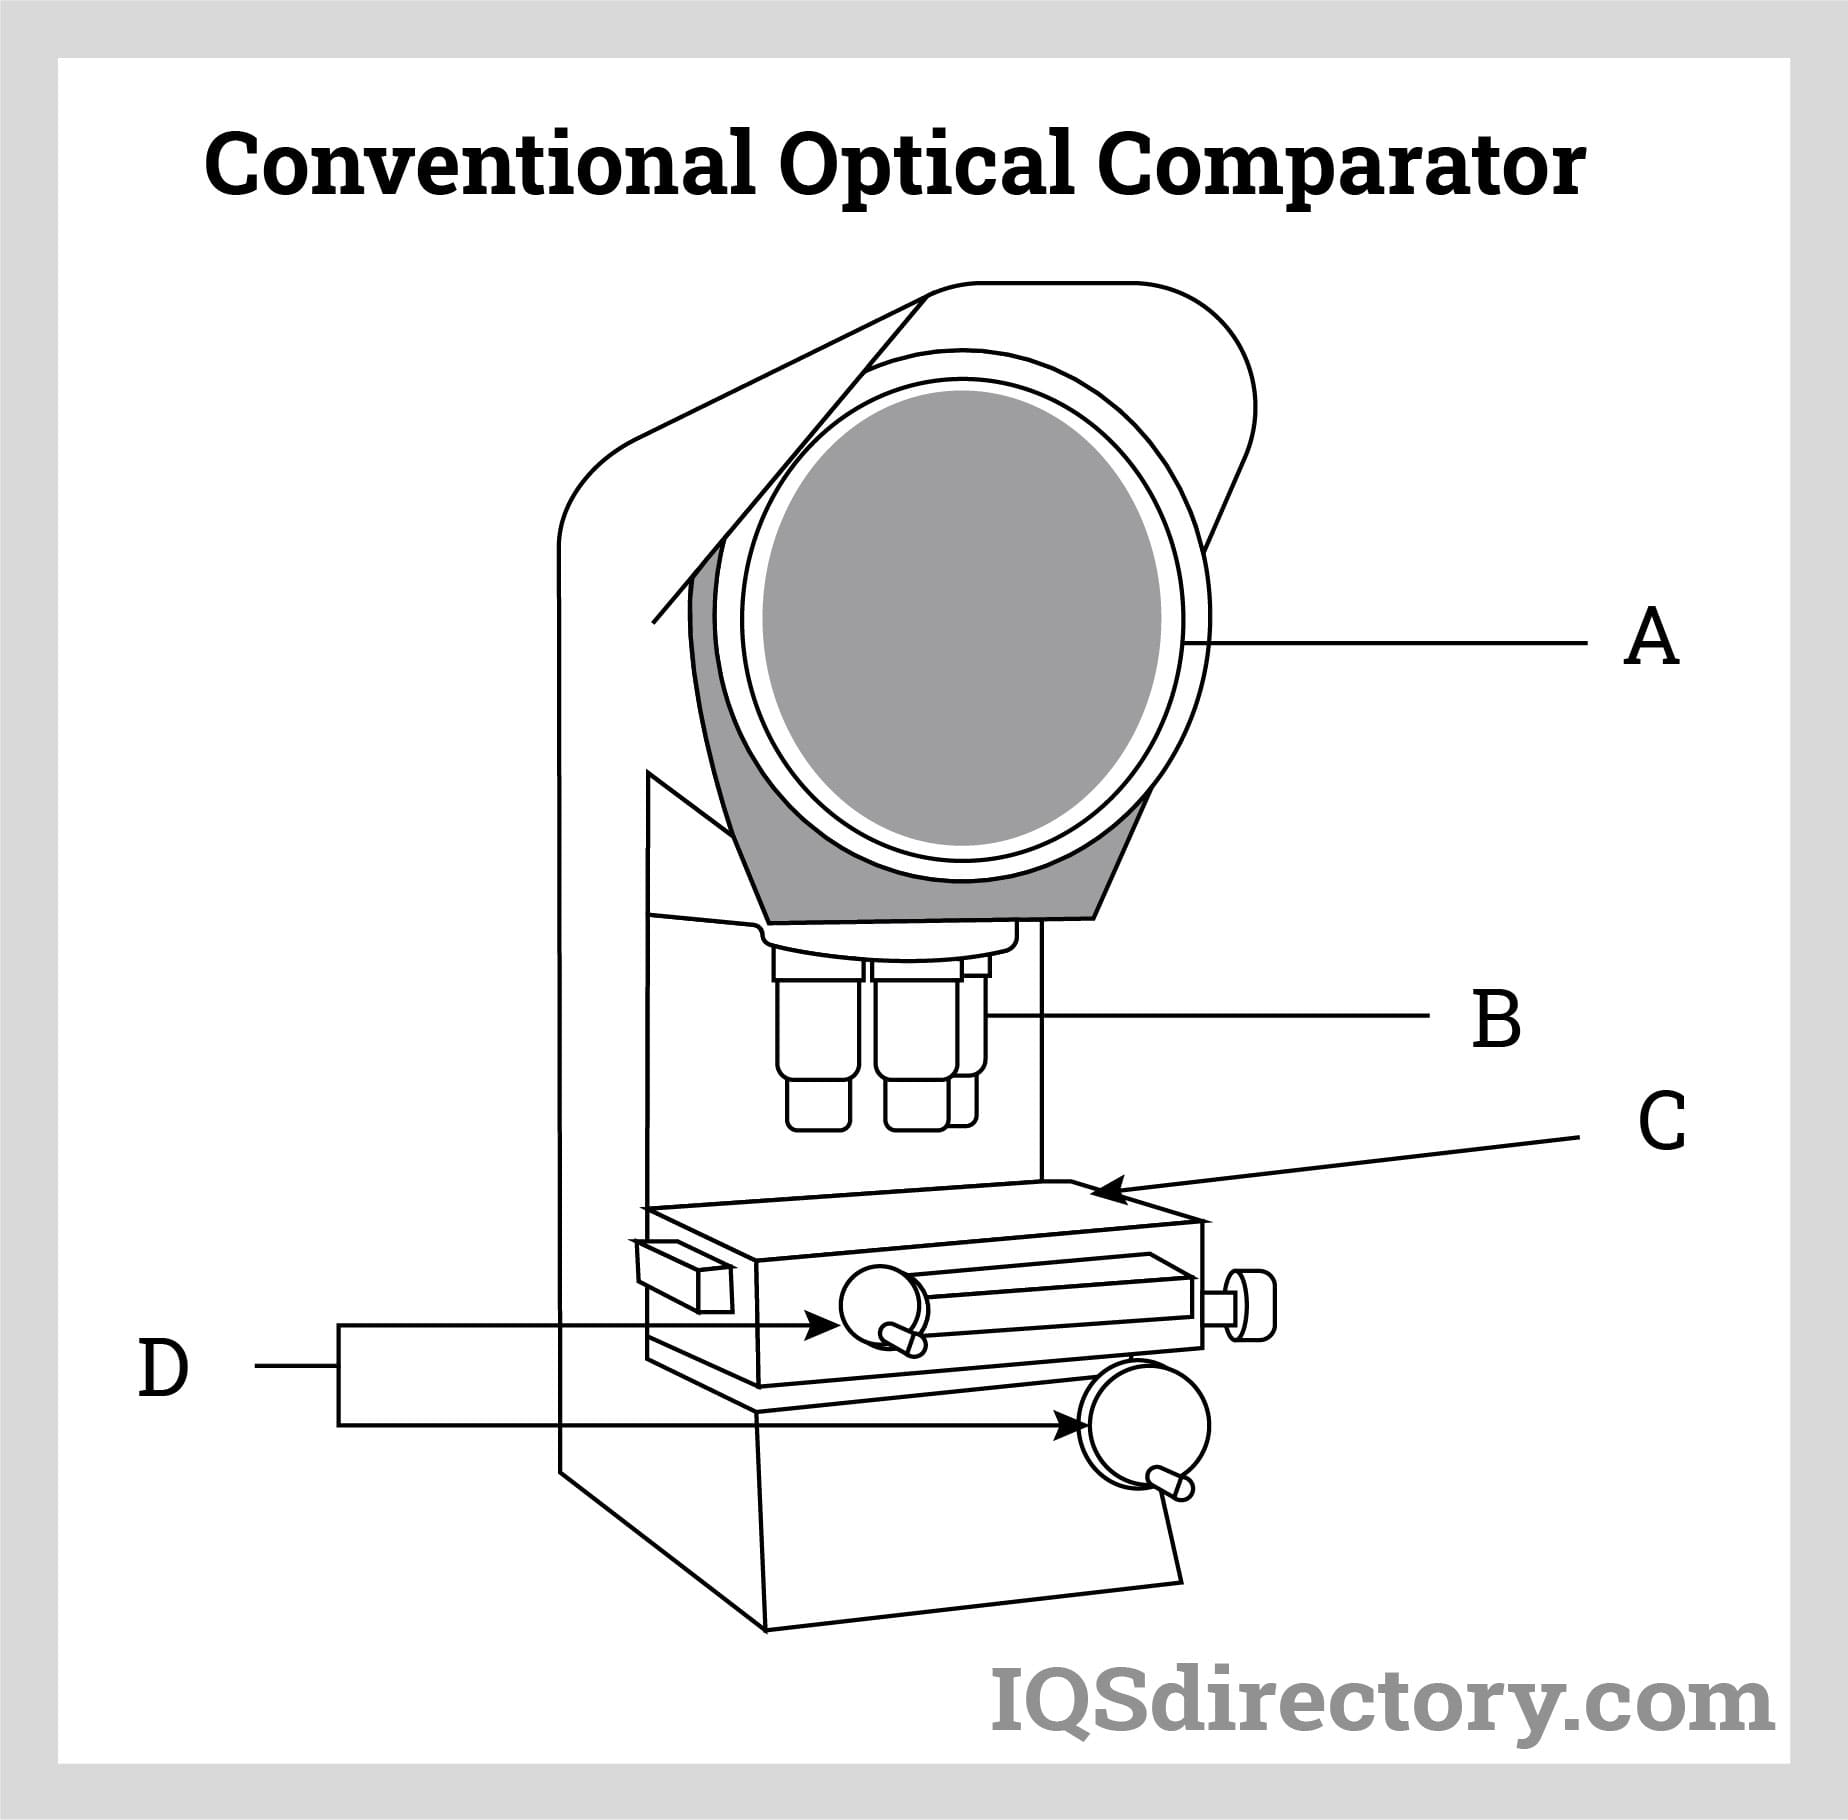 Conventional Optical Comparator